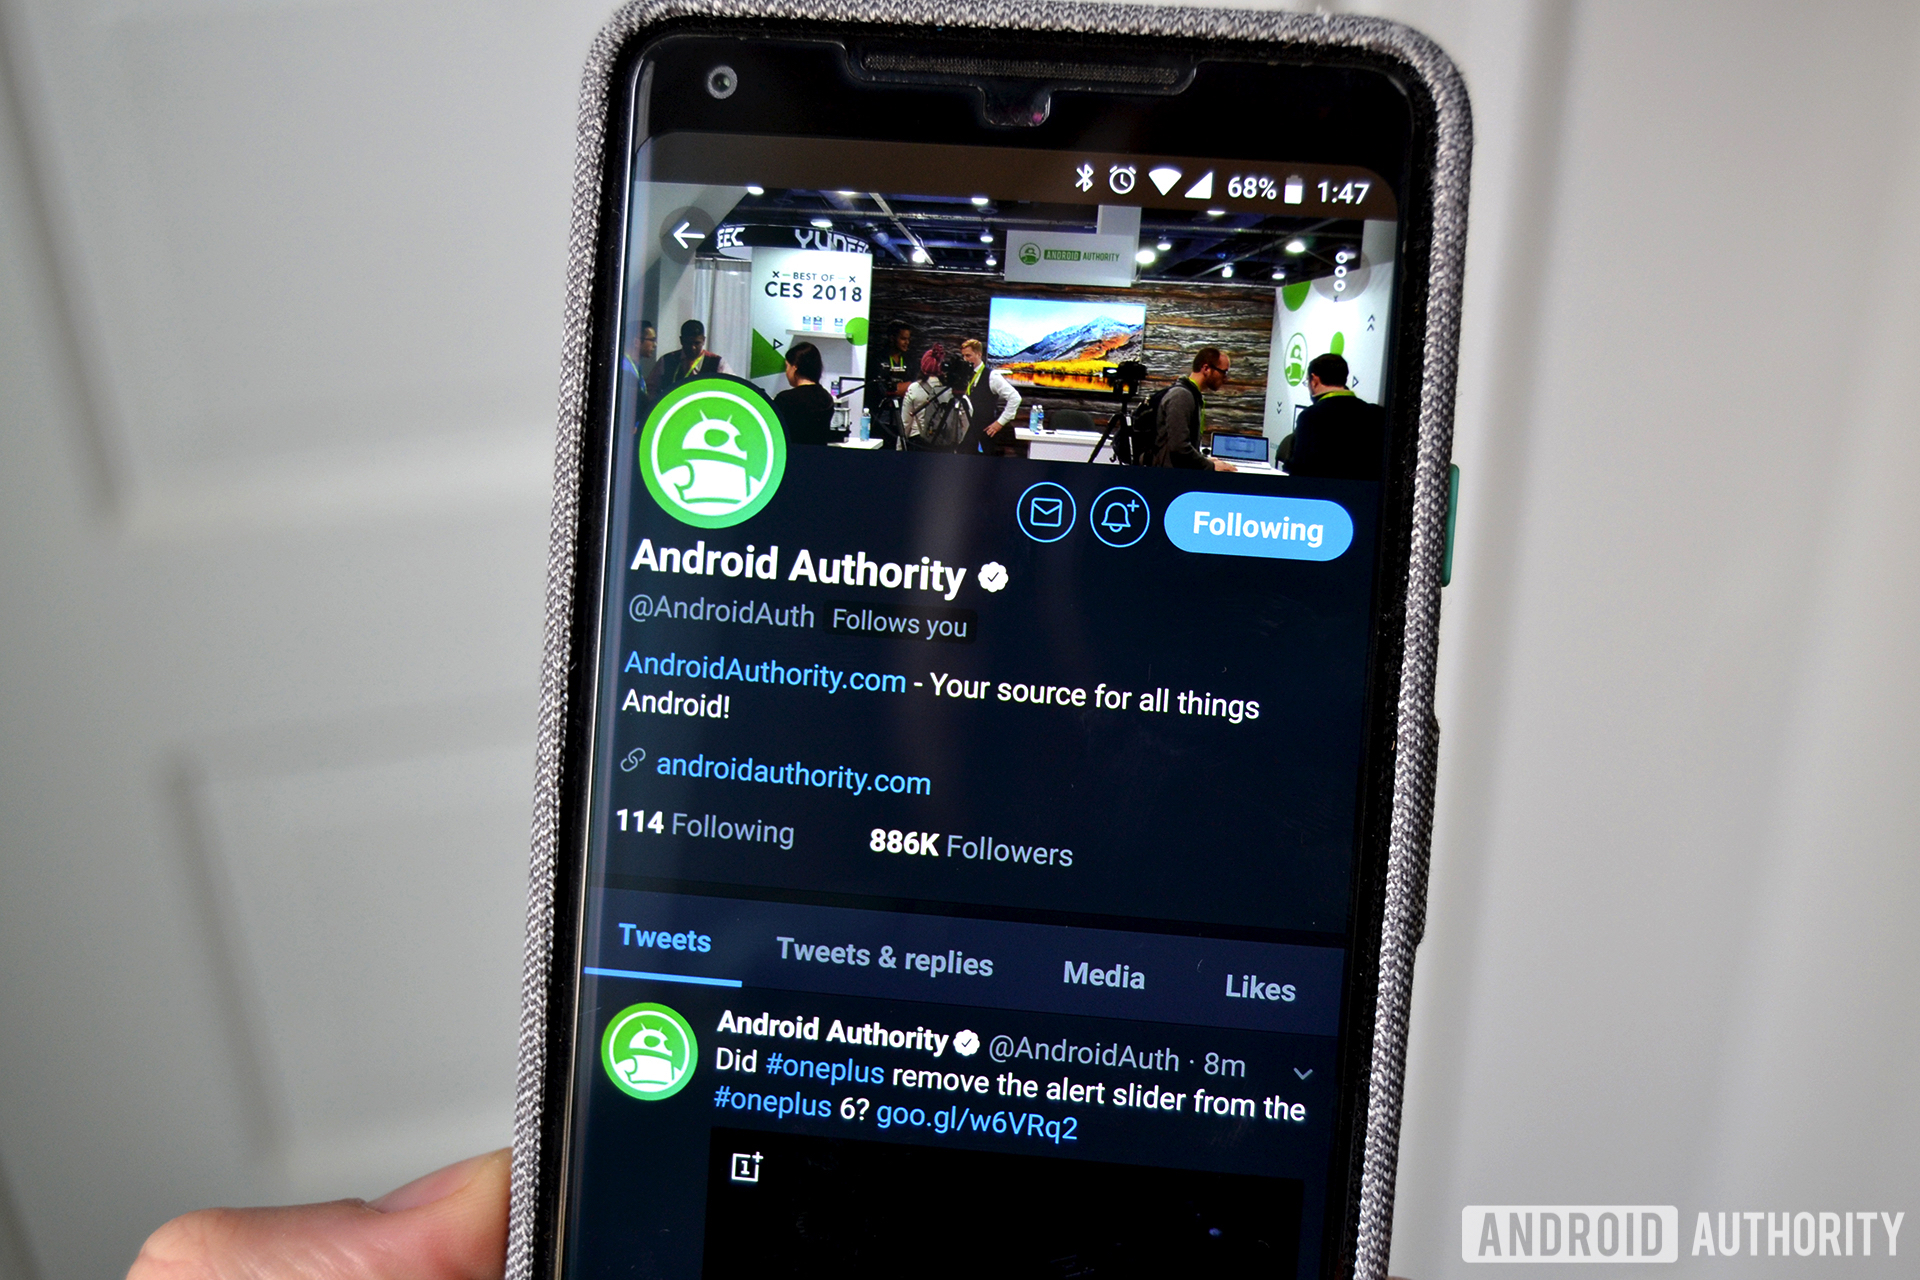 Android Authority Twitter account